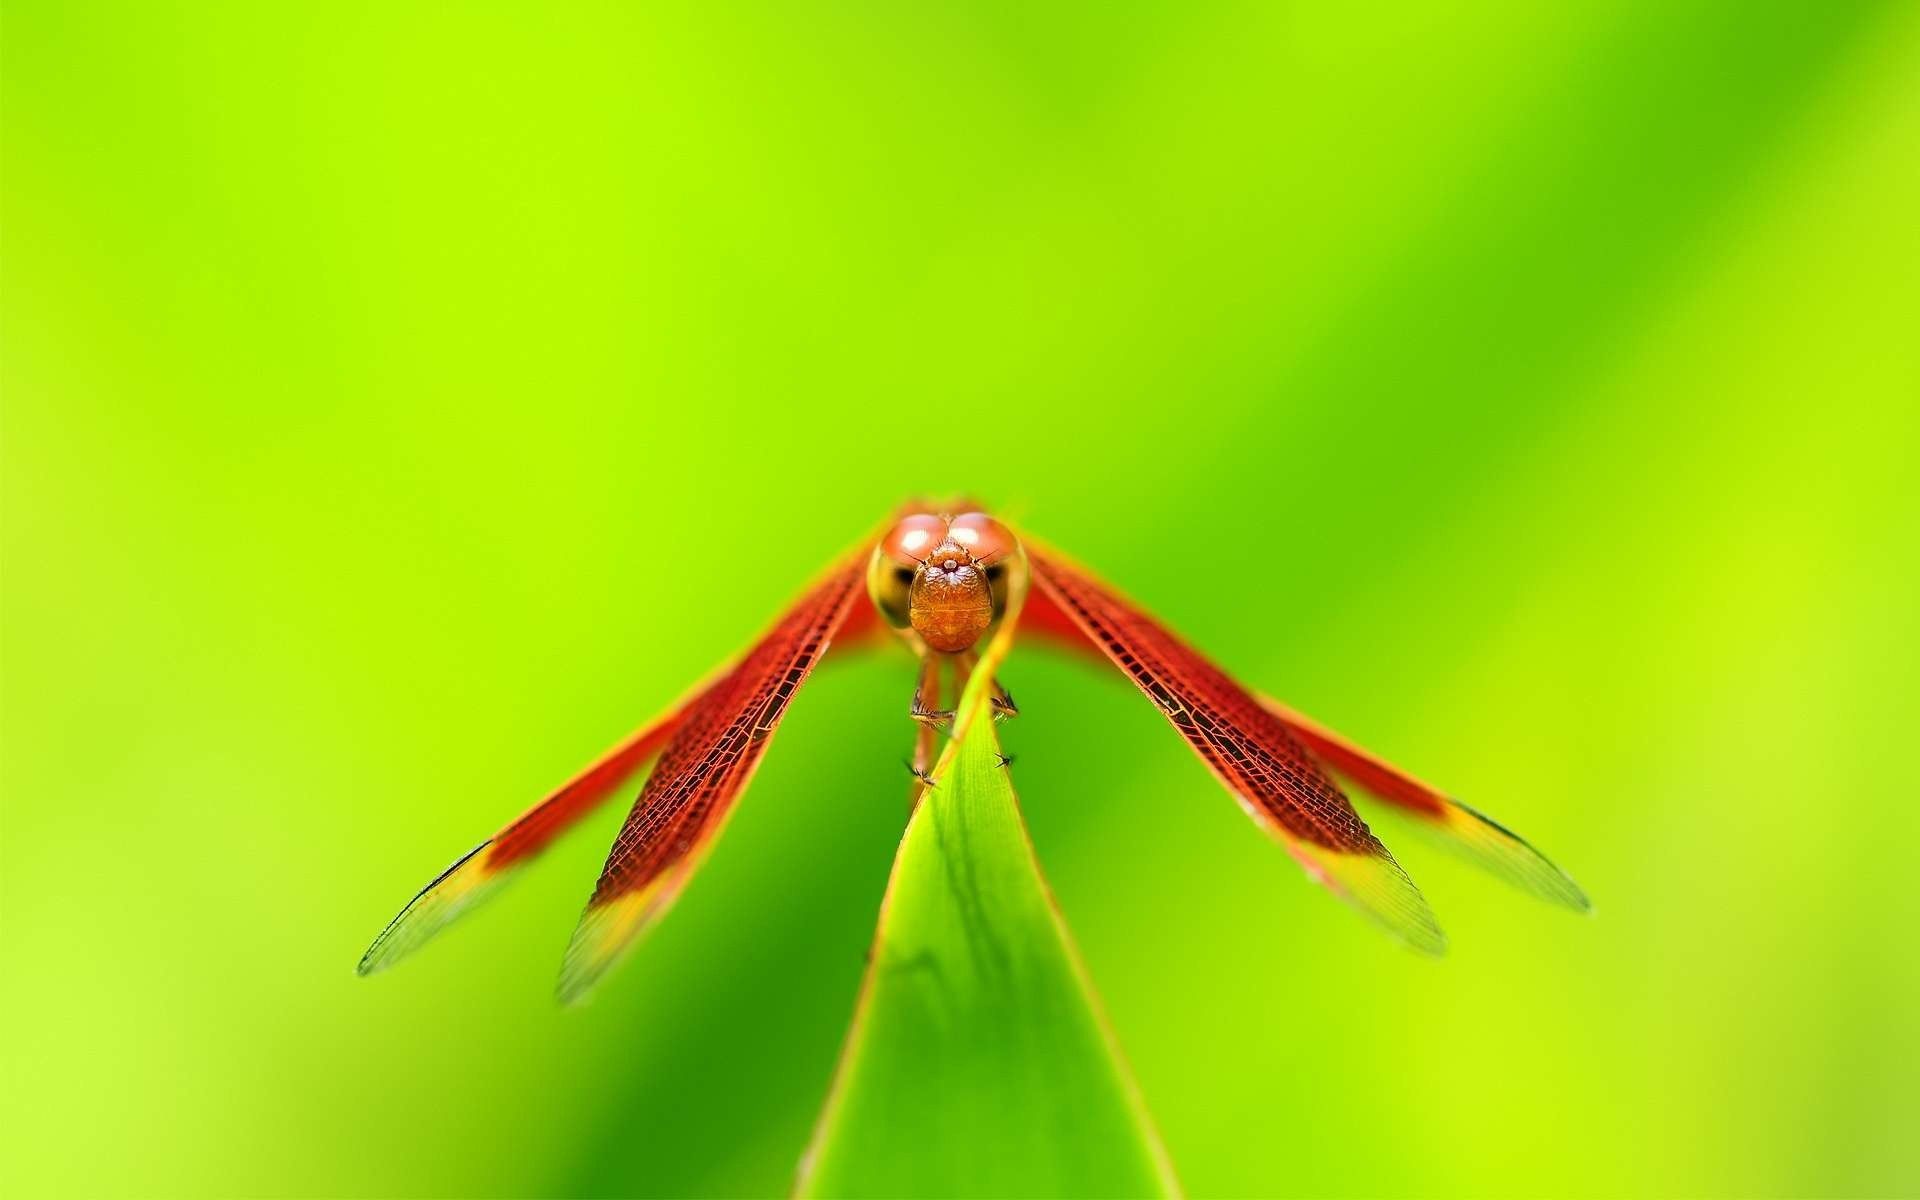 HD wallpaper, Insect, Dragonfly